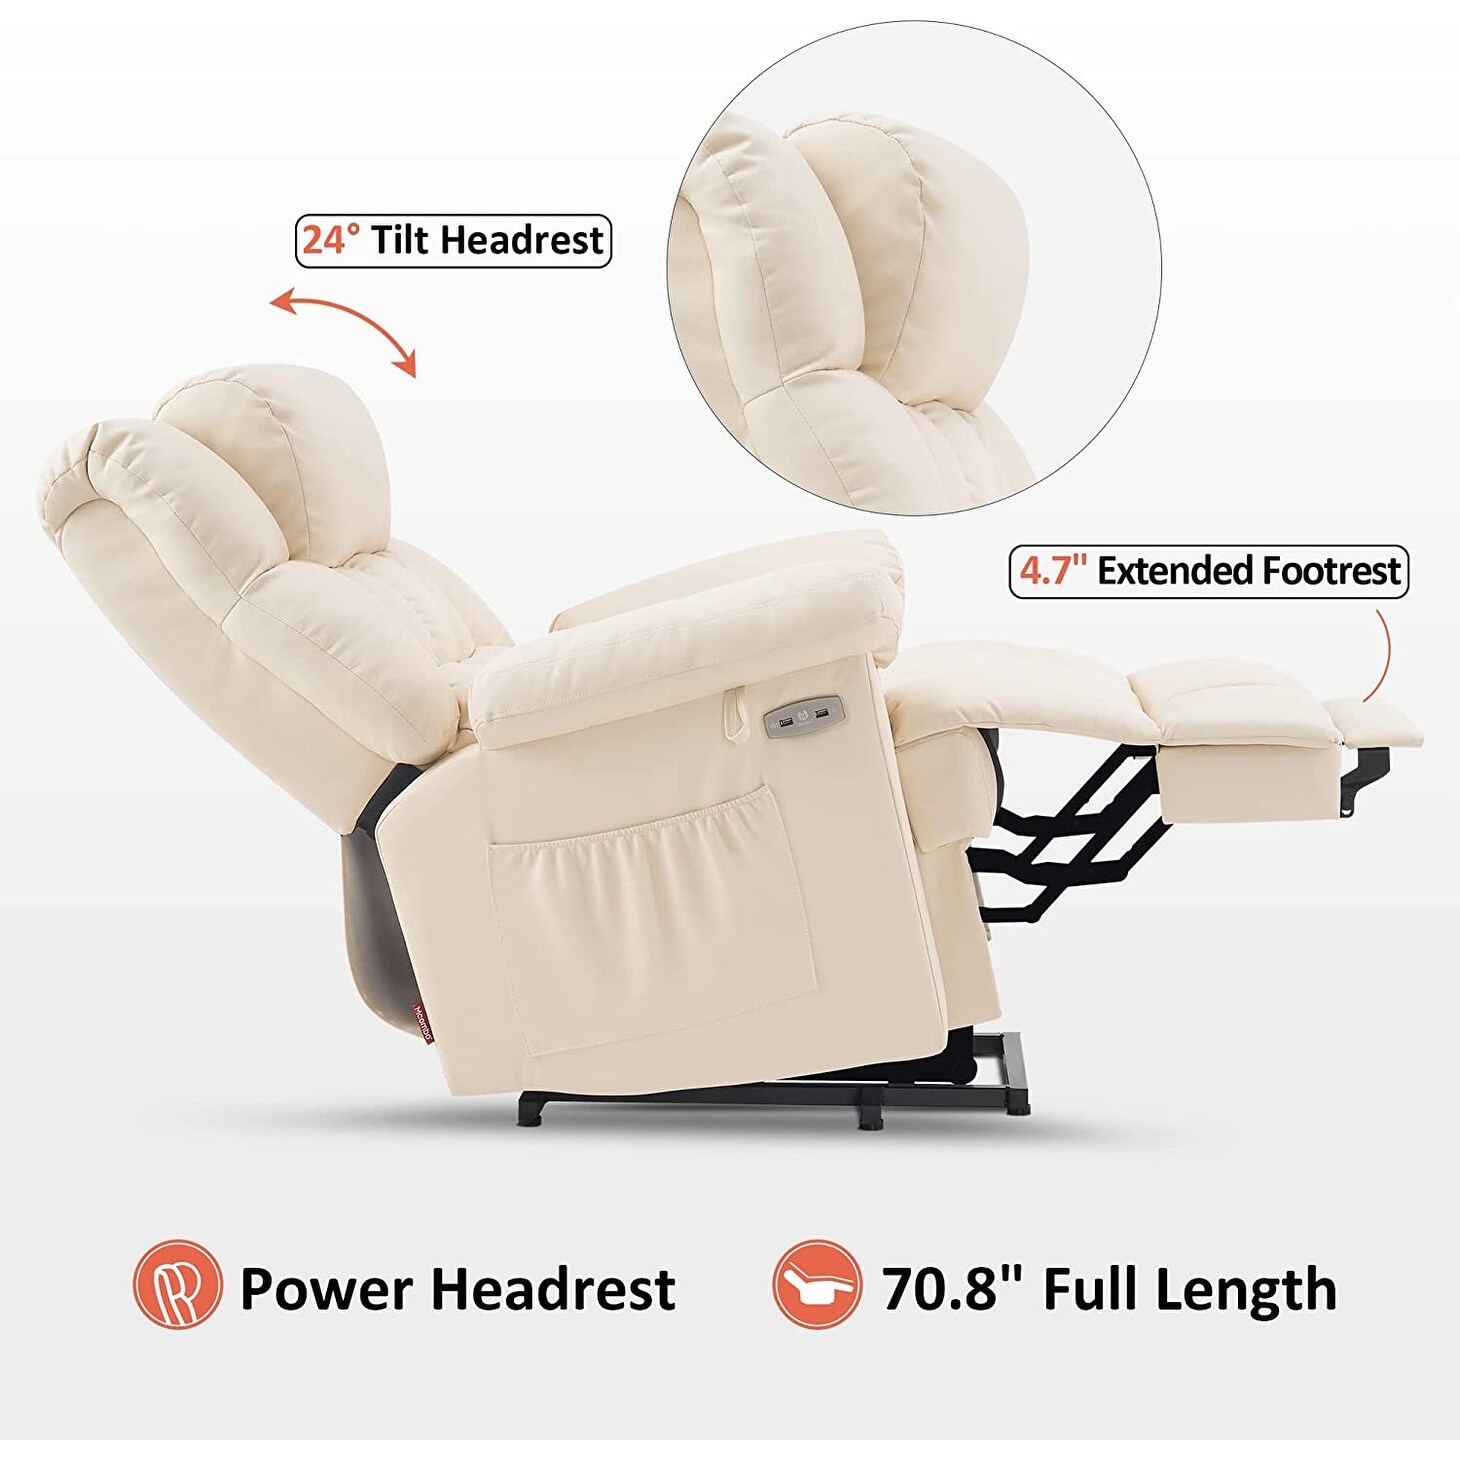 Mcombo Power Lift Recliner Chair with Massage and Heat, Adjustable Headrest & Extended Footrest for Elderly People, Fabric 7533